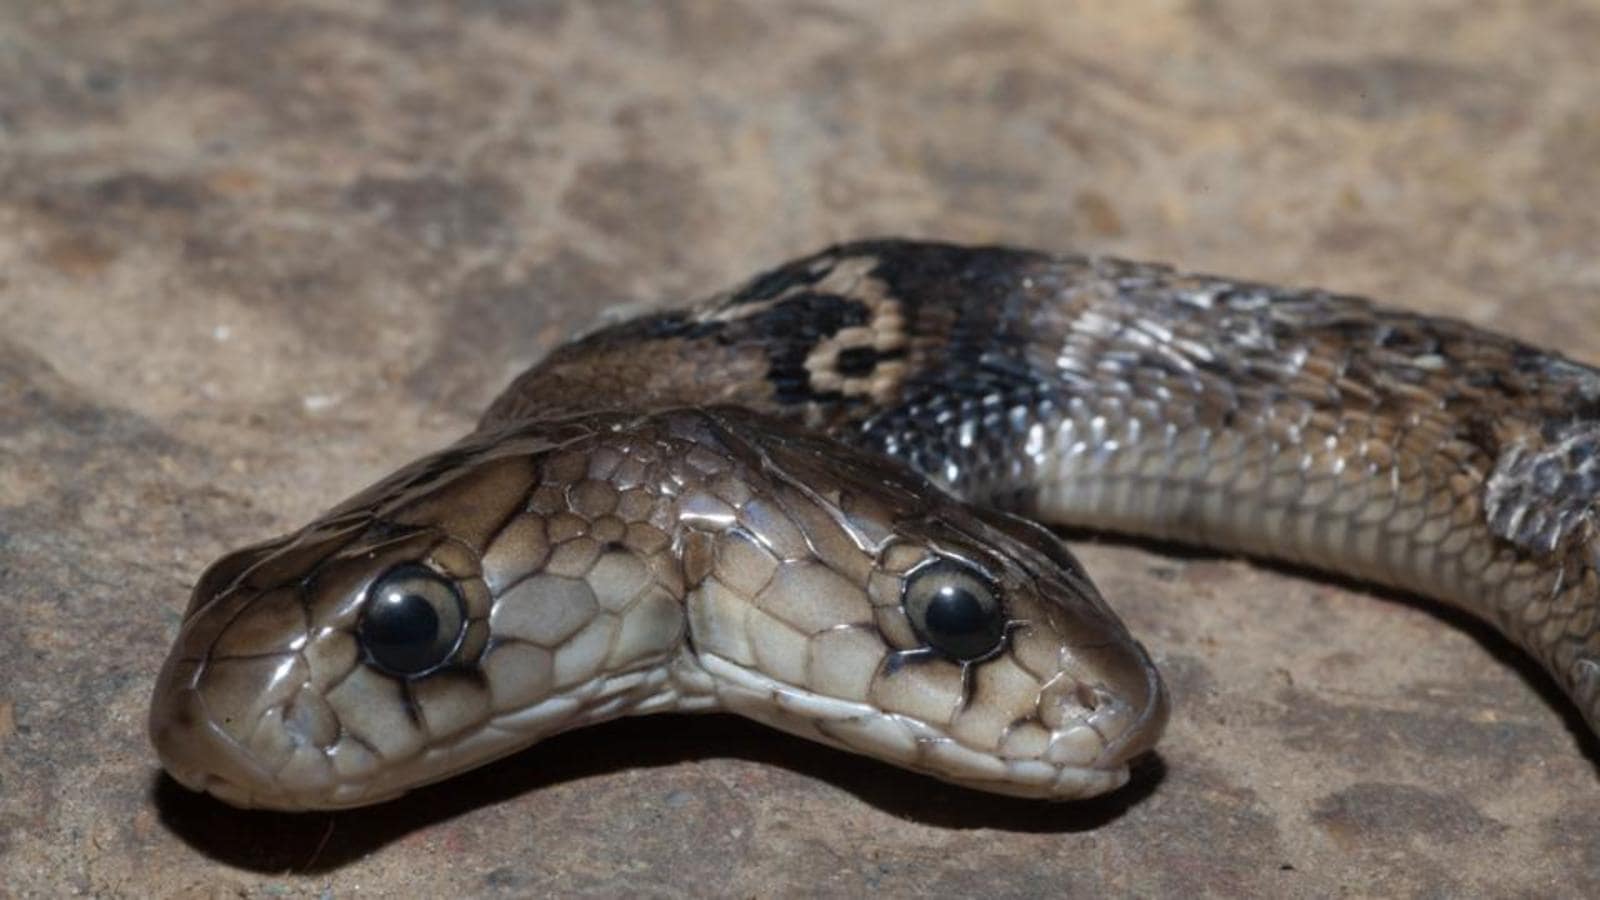 A 23-foot-long, three-headed black cobra was discovered on an Indian ...